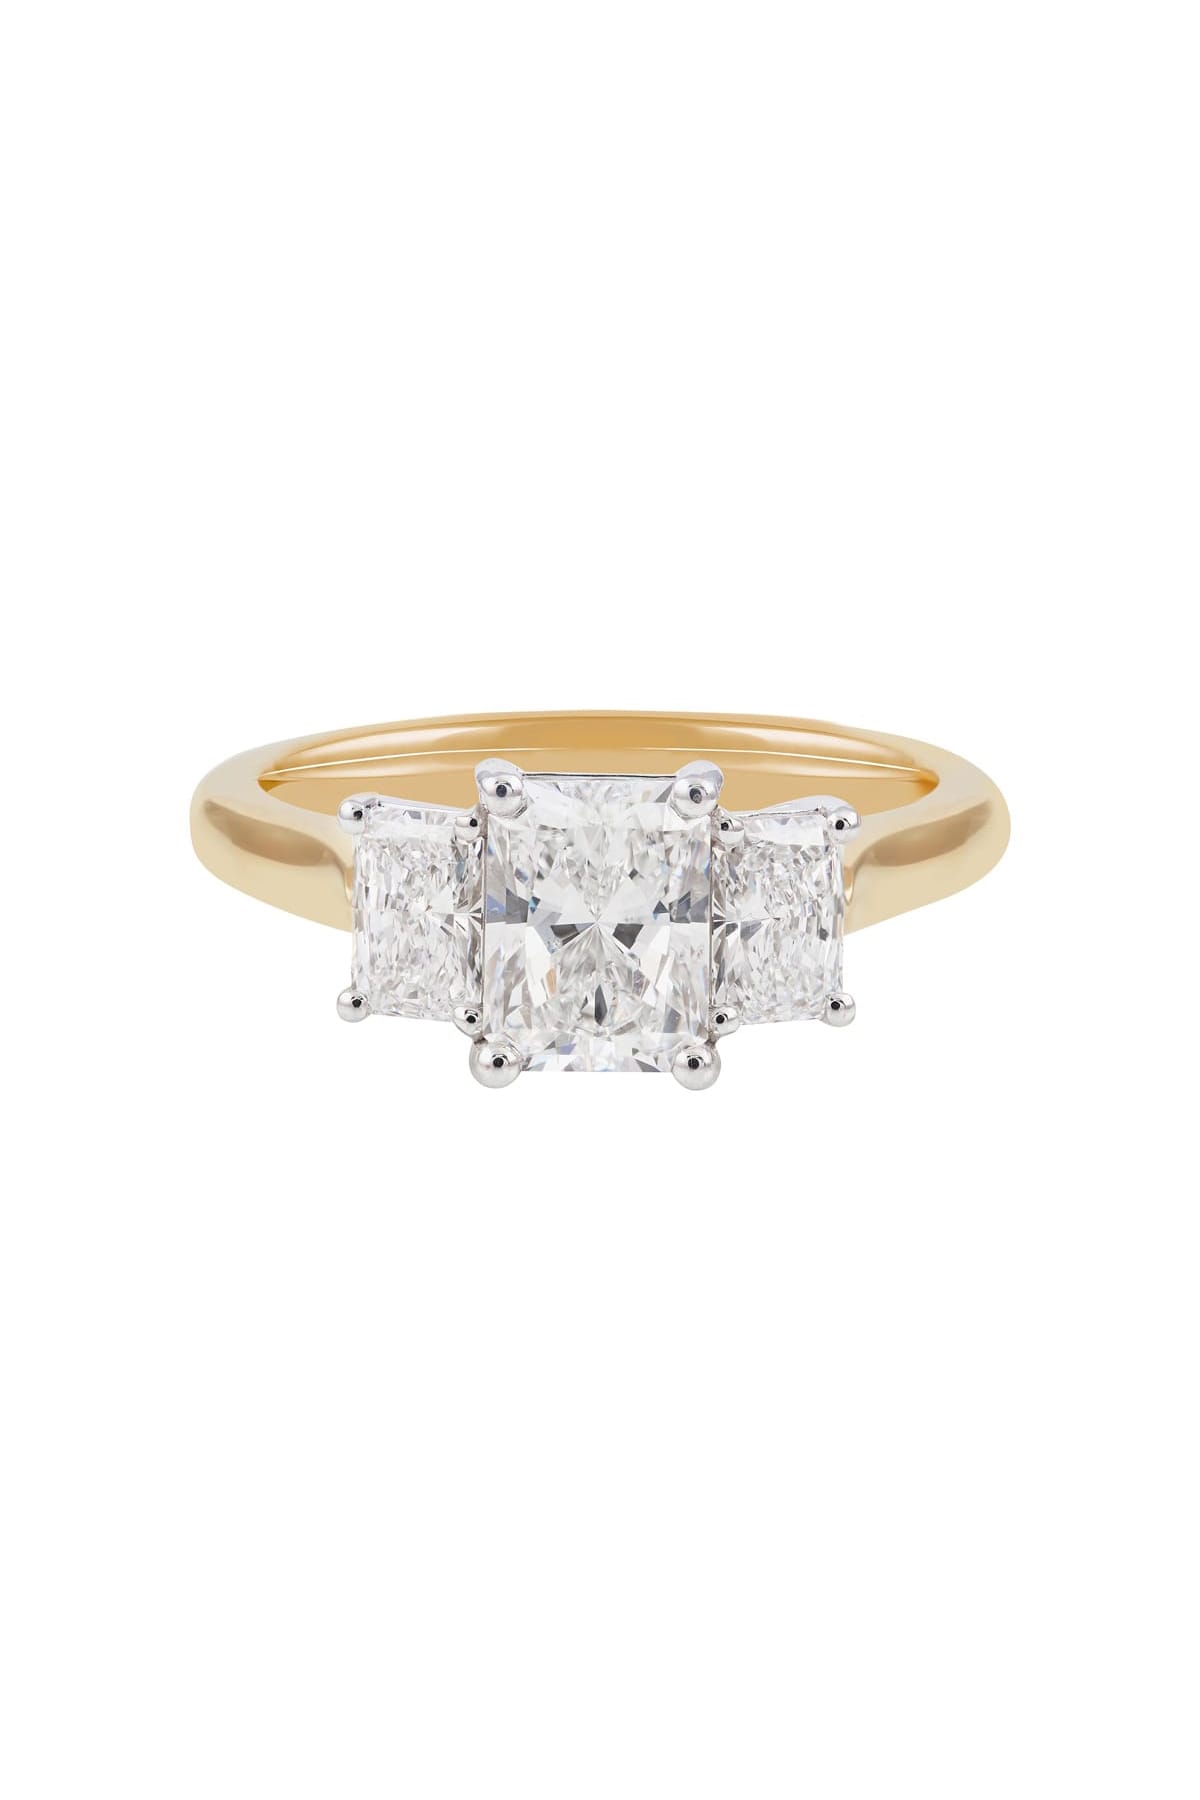 1.20ct Radiant Cut Trilogy Ring set in 18ct Yellow and White Gold available at LeGassick Diamonds and Jewellery Gold Coast, Australia.